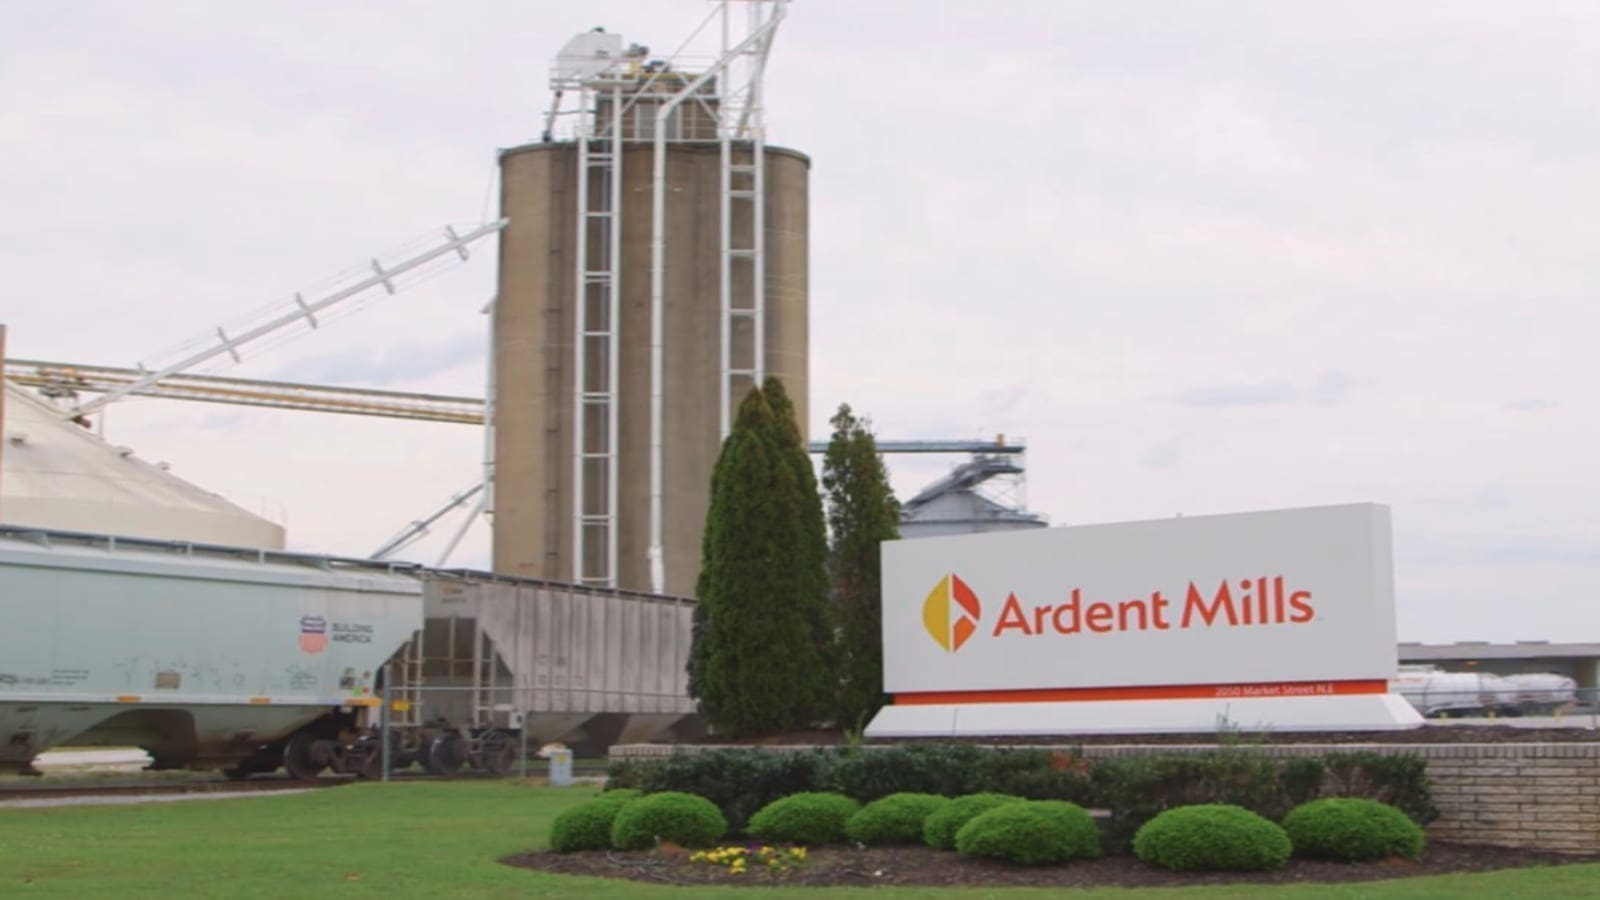 Ardent Mills delivers strong quarterly results driven by favorable market conditions